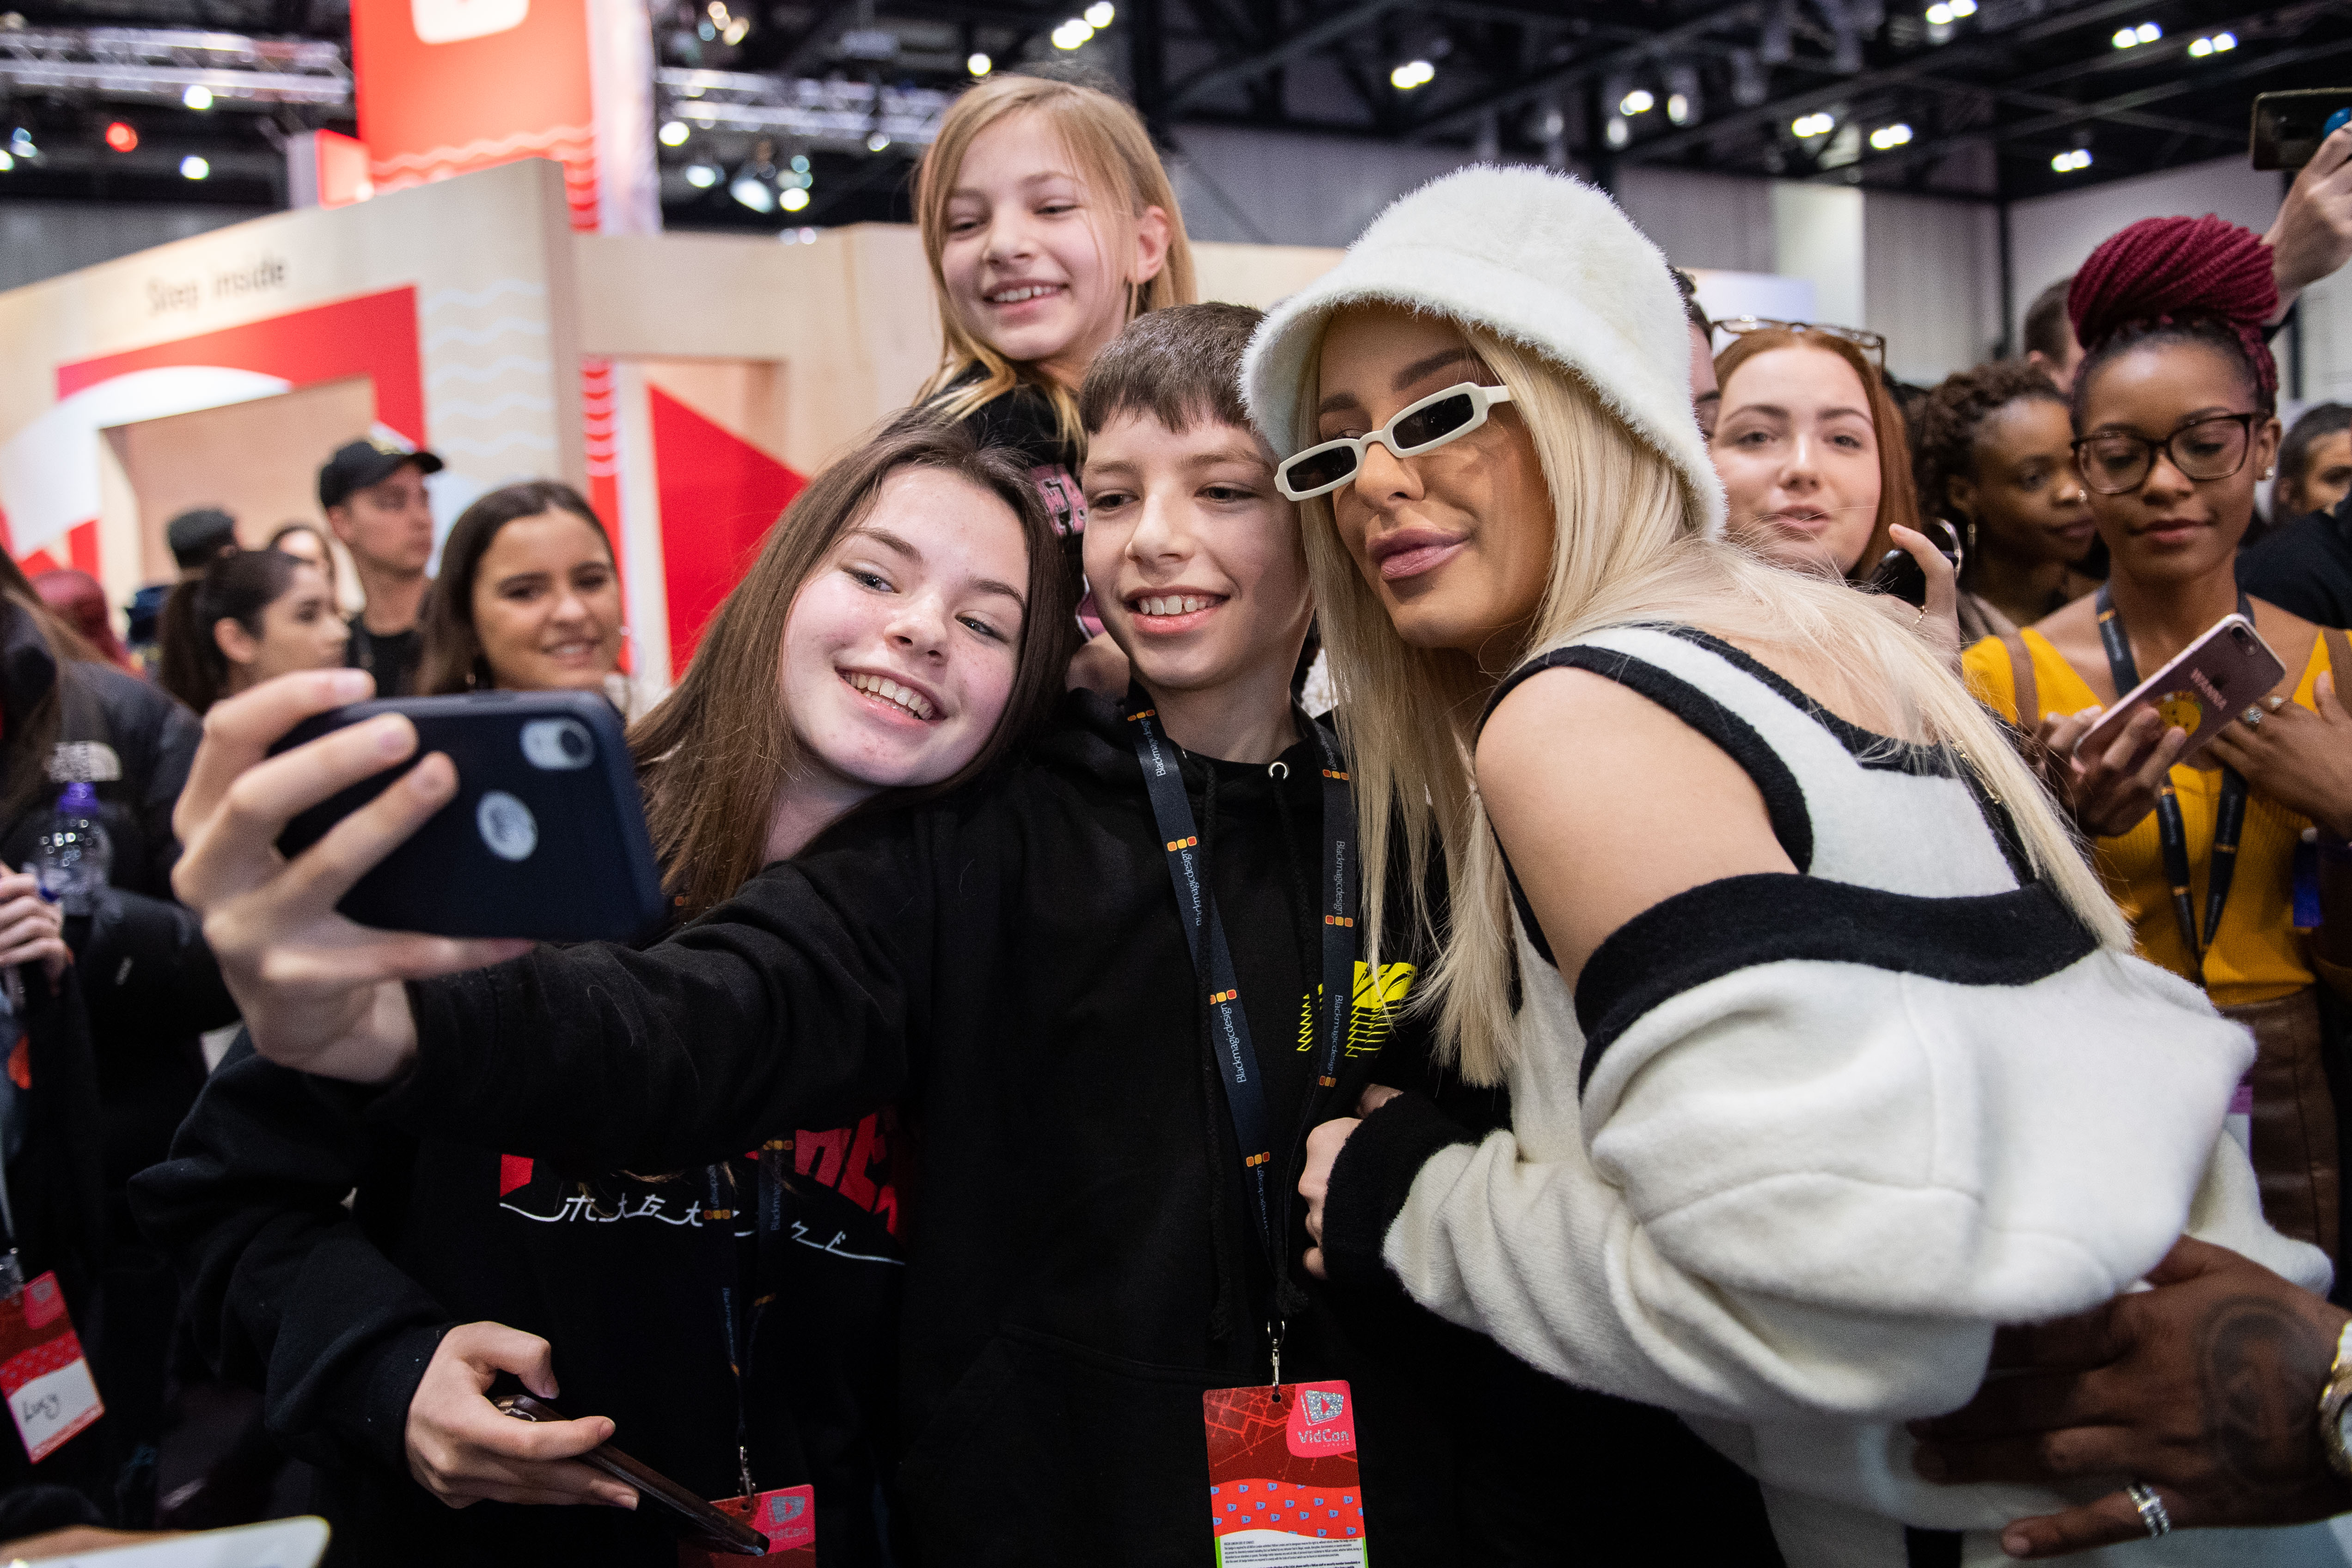 VidCon 2020 Details, Ticket Prices, Lineup, Date, Location, More